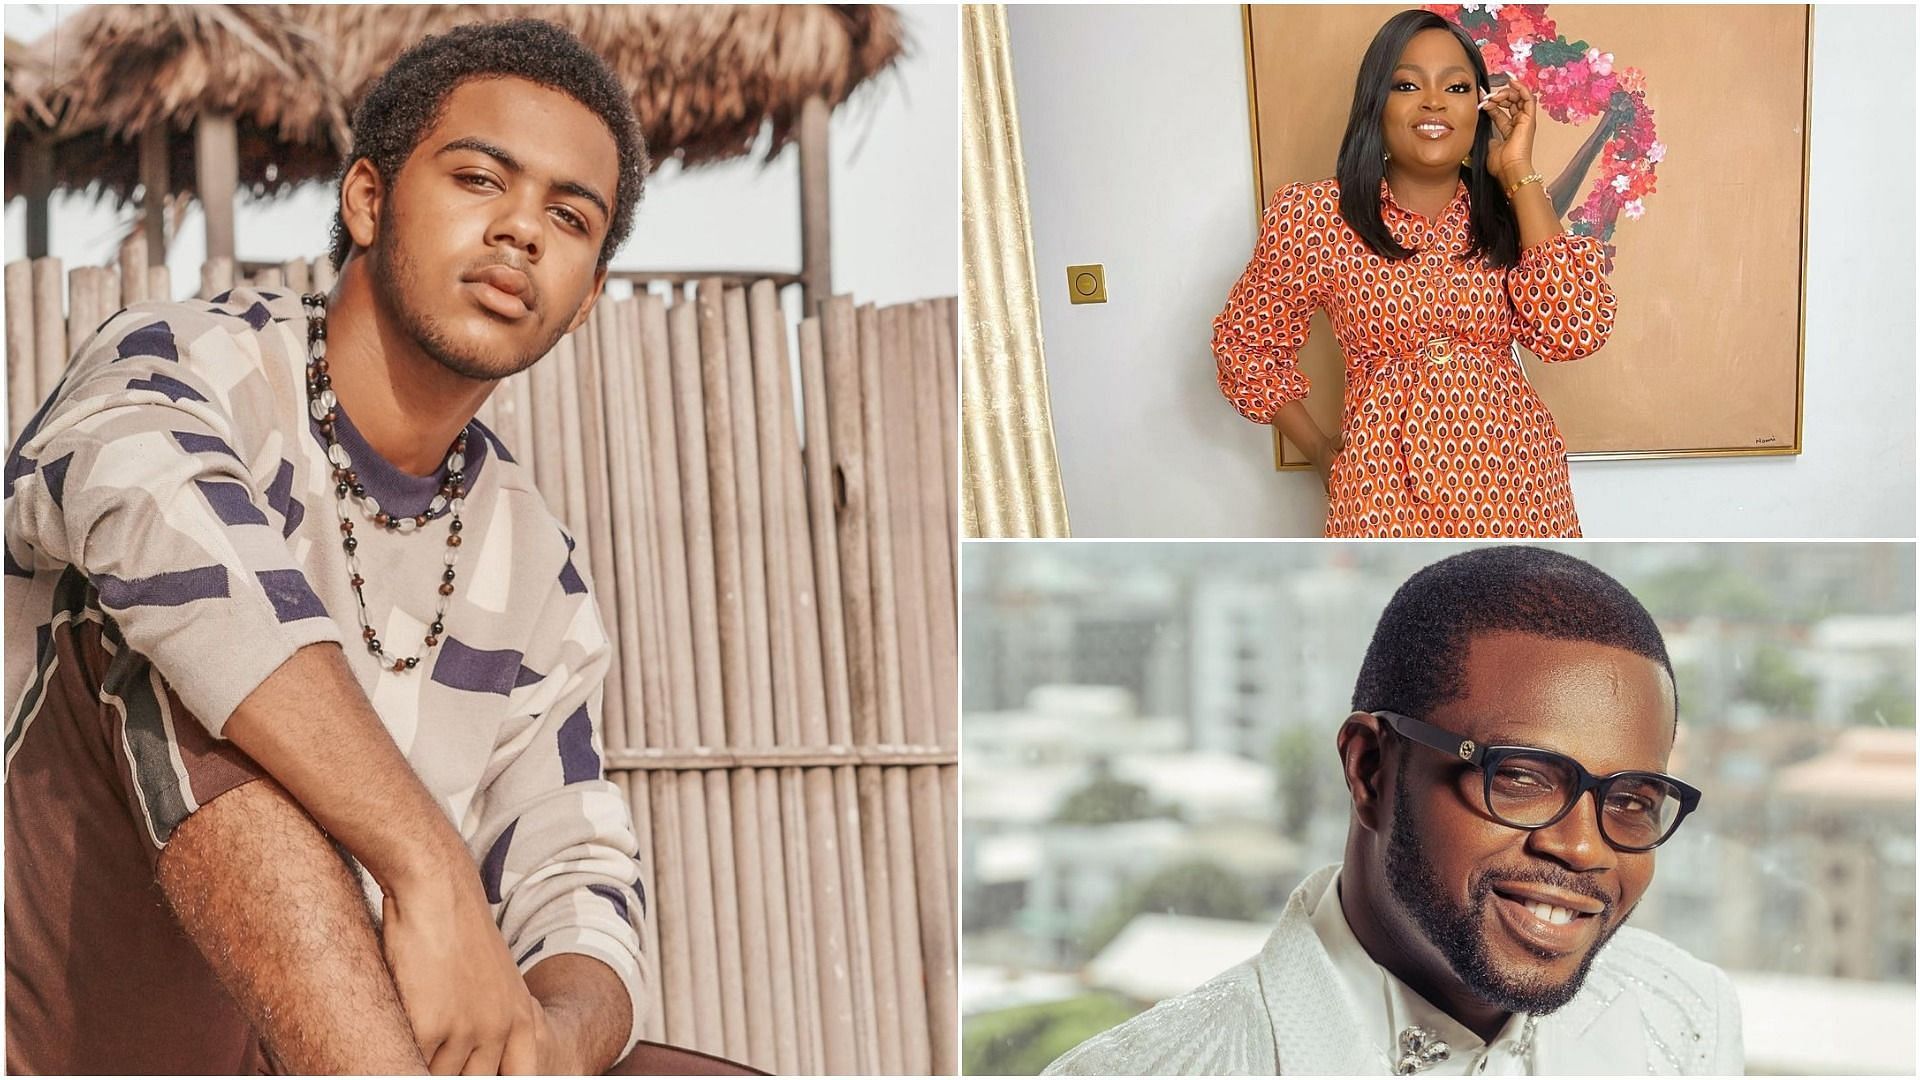 Benito has accused his parents of cheating each other (Images via benito.b.andrews, funkejenifaakindele and jjcskillz/Instagram)